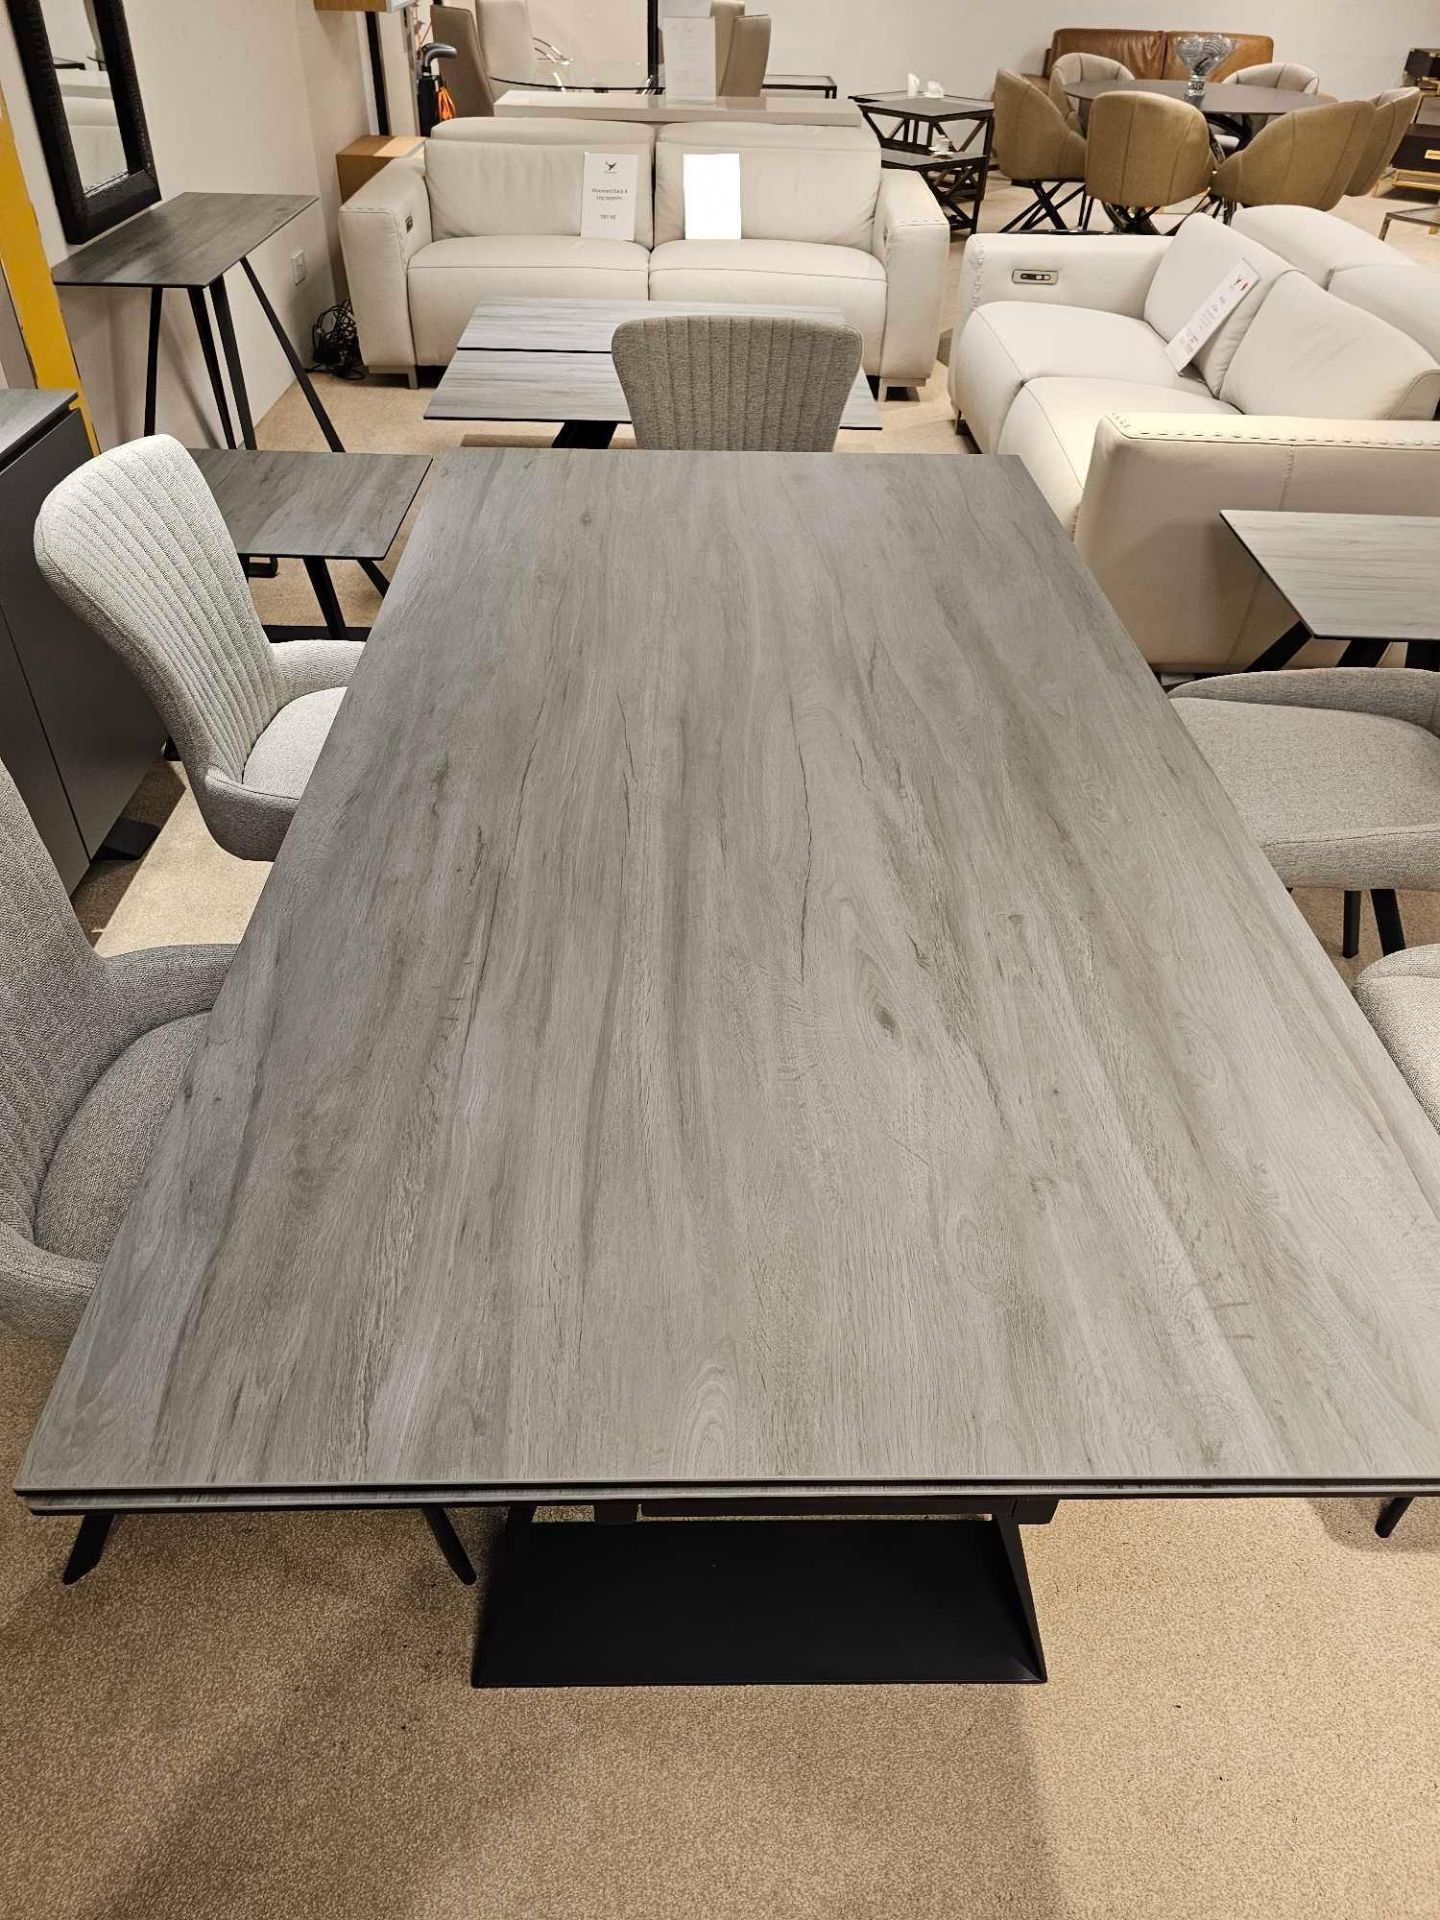 Spartan Dining Table by Kesterport The Spartan Dining Table is part of a sophisticated collection of - Image 11 of 12